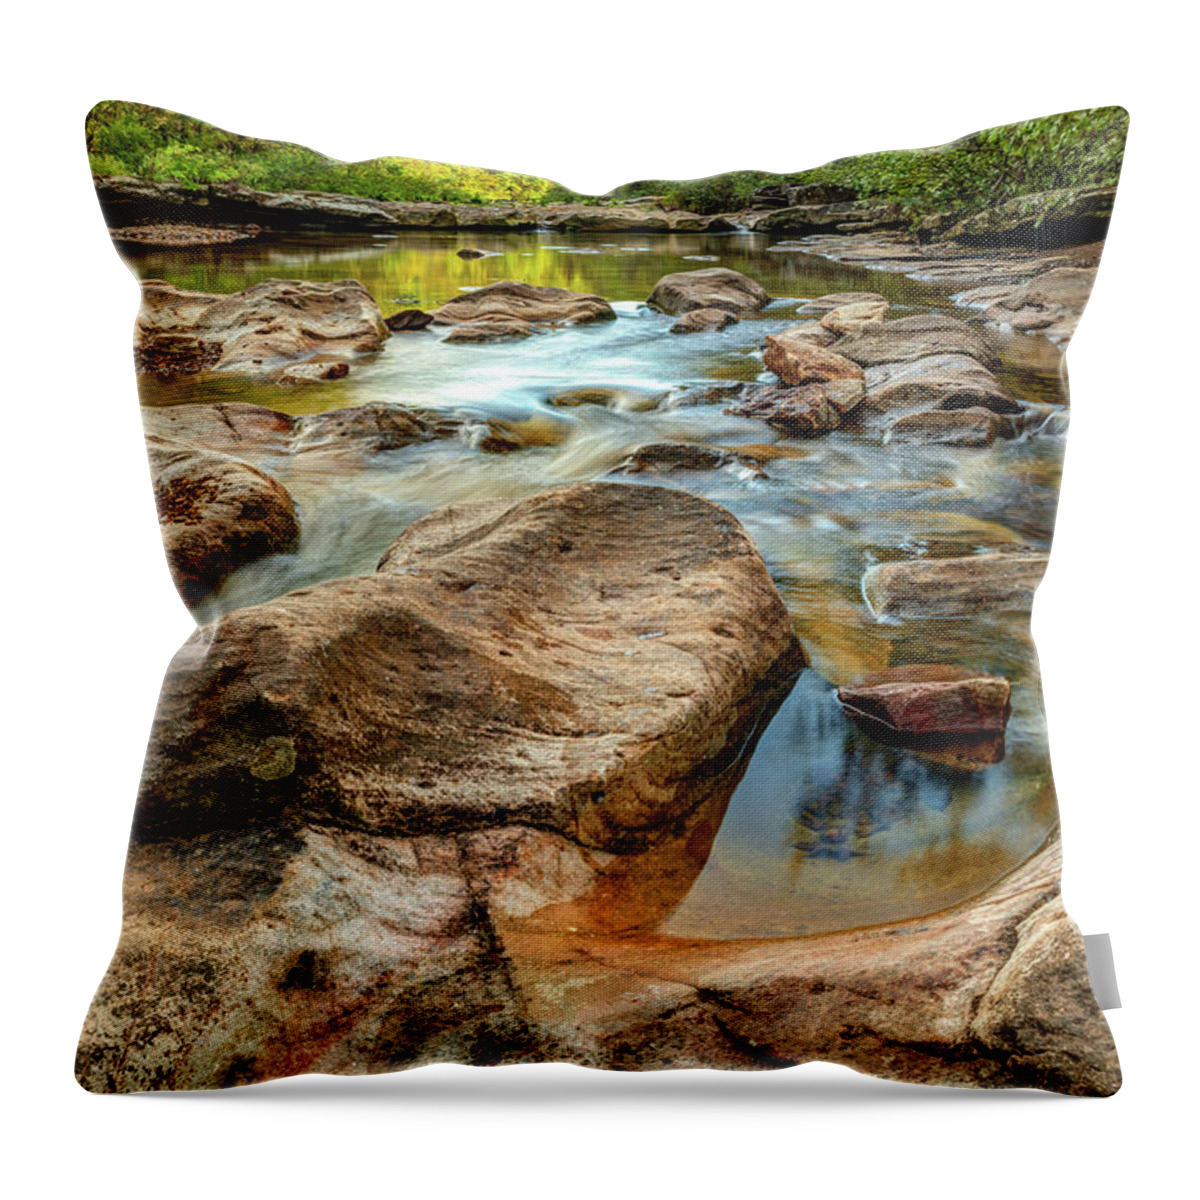 America Throw Pillow featuring the photograph Kings River Falls Nature Trail - Arkansas by Gregory Ballos